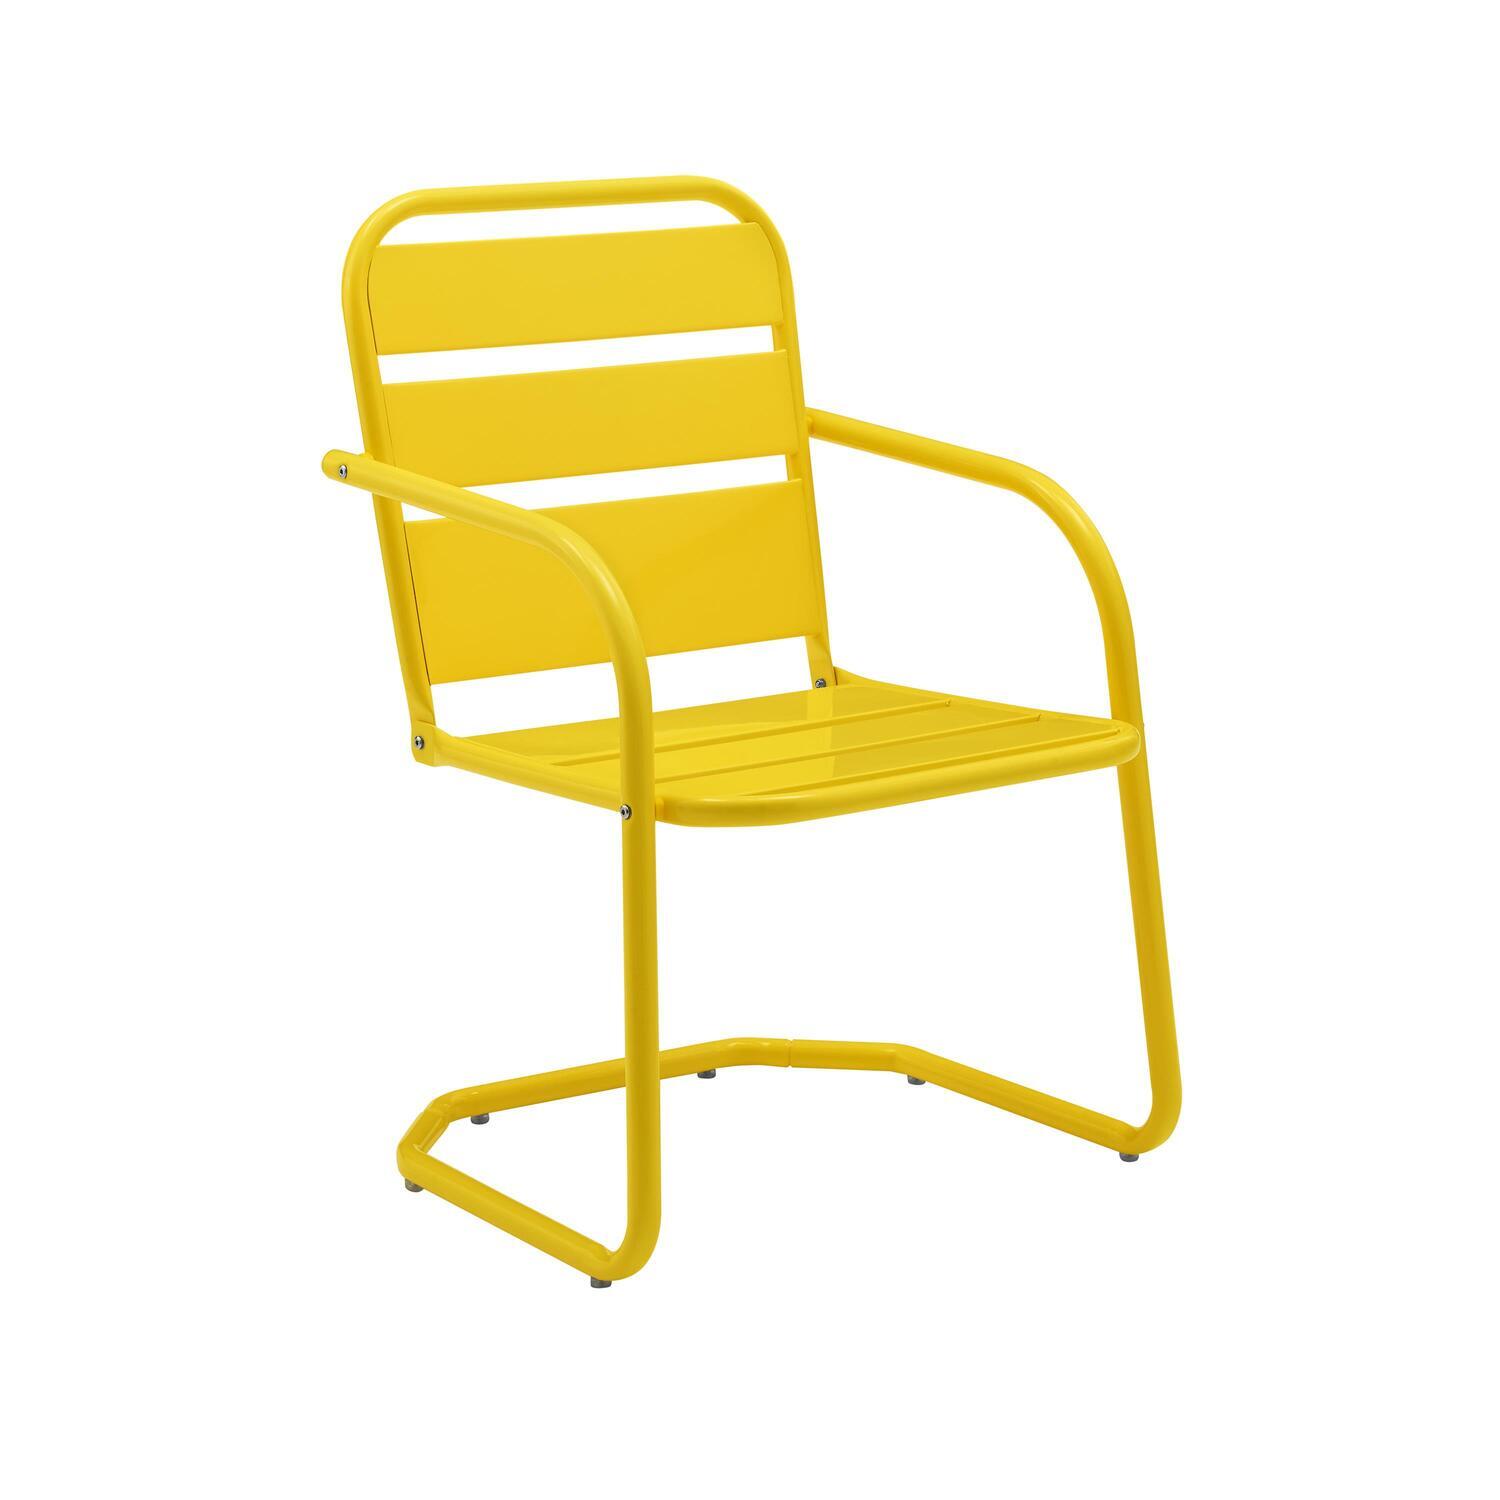 Crosley Brighton Metal Patio Chair in Yellow (Set of 2) - image 1 of 10